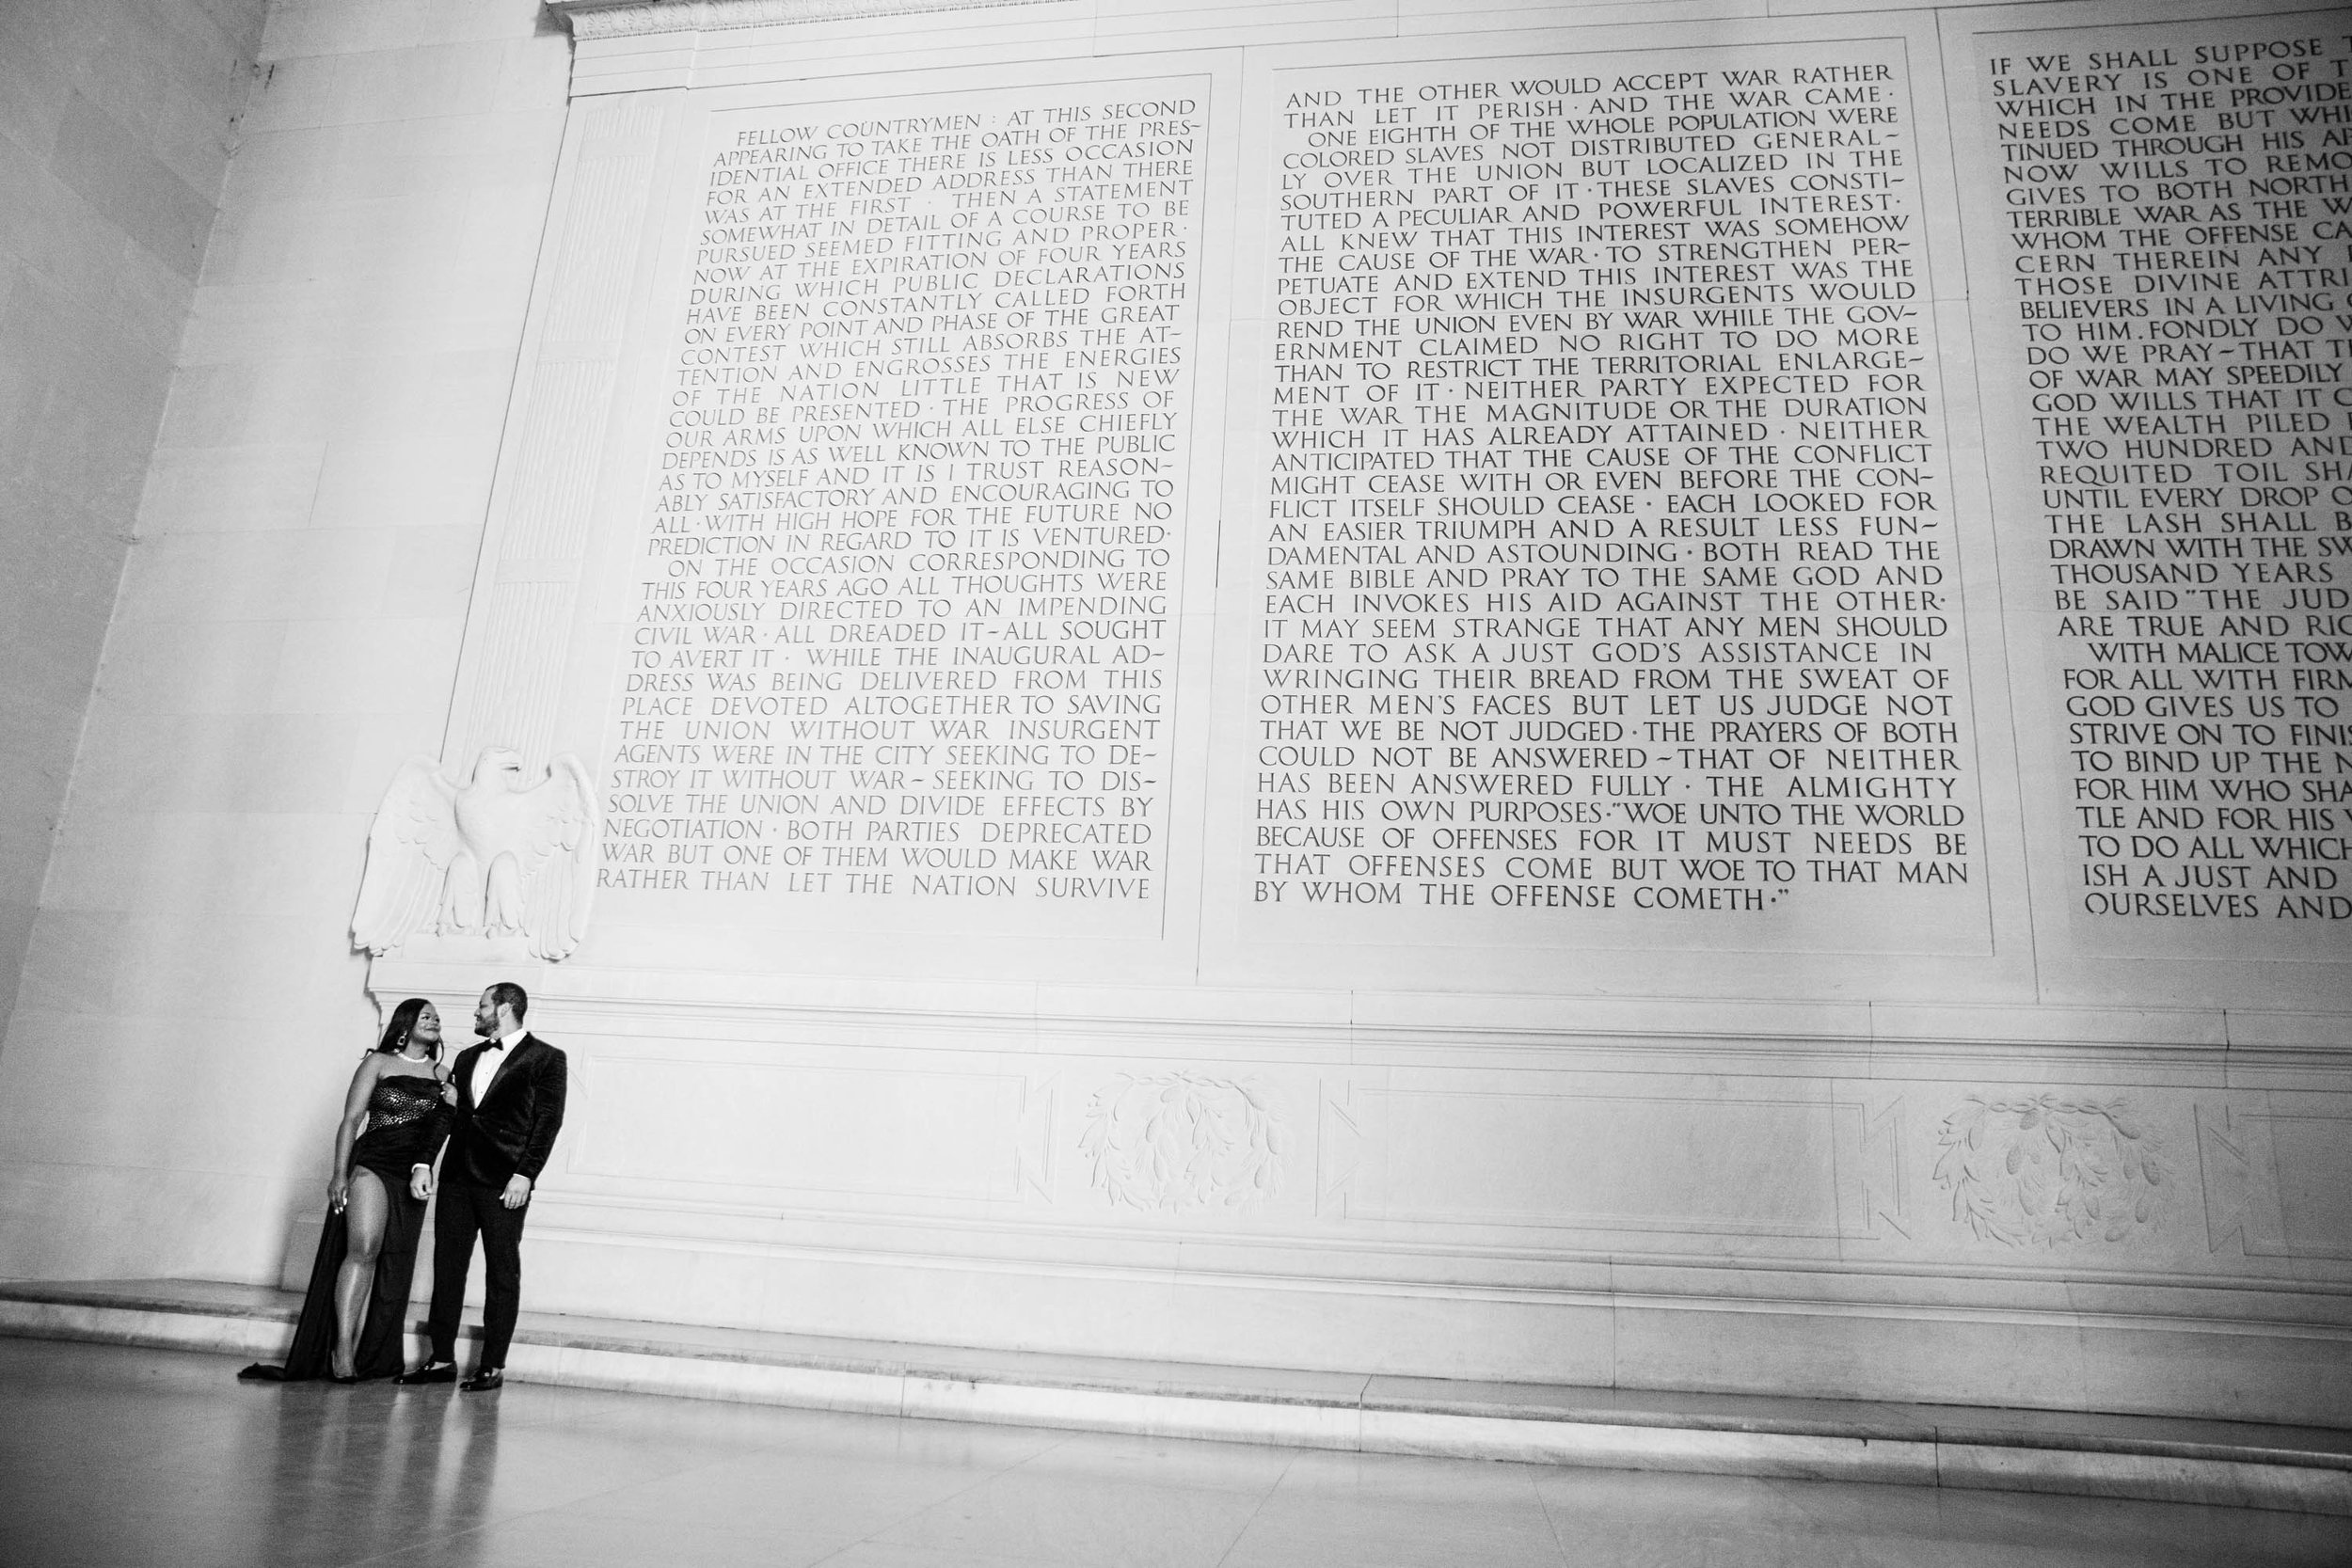 Top DC Engagement Session with Black Orchid Events Couple shot by Megapixels Media at the Lincoln Memorial-14.jpg